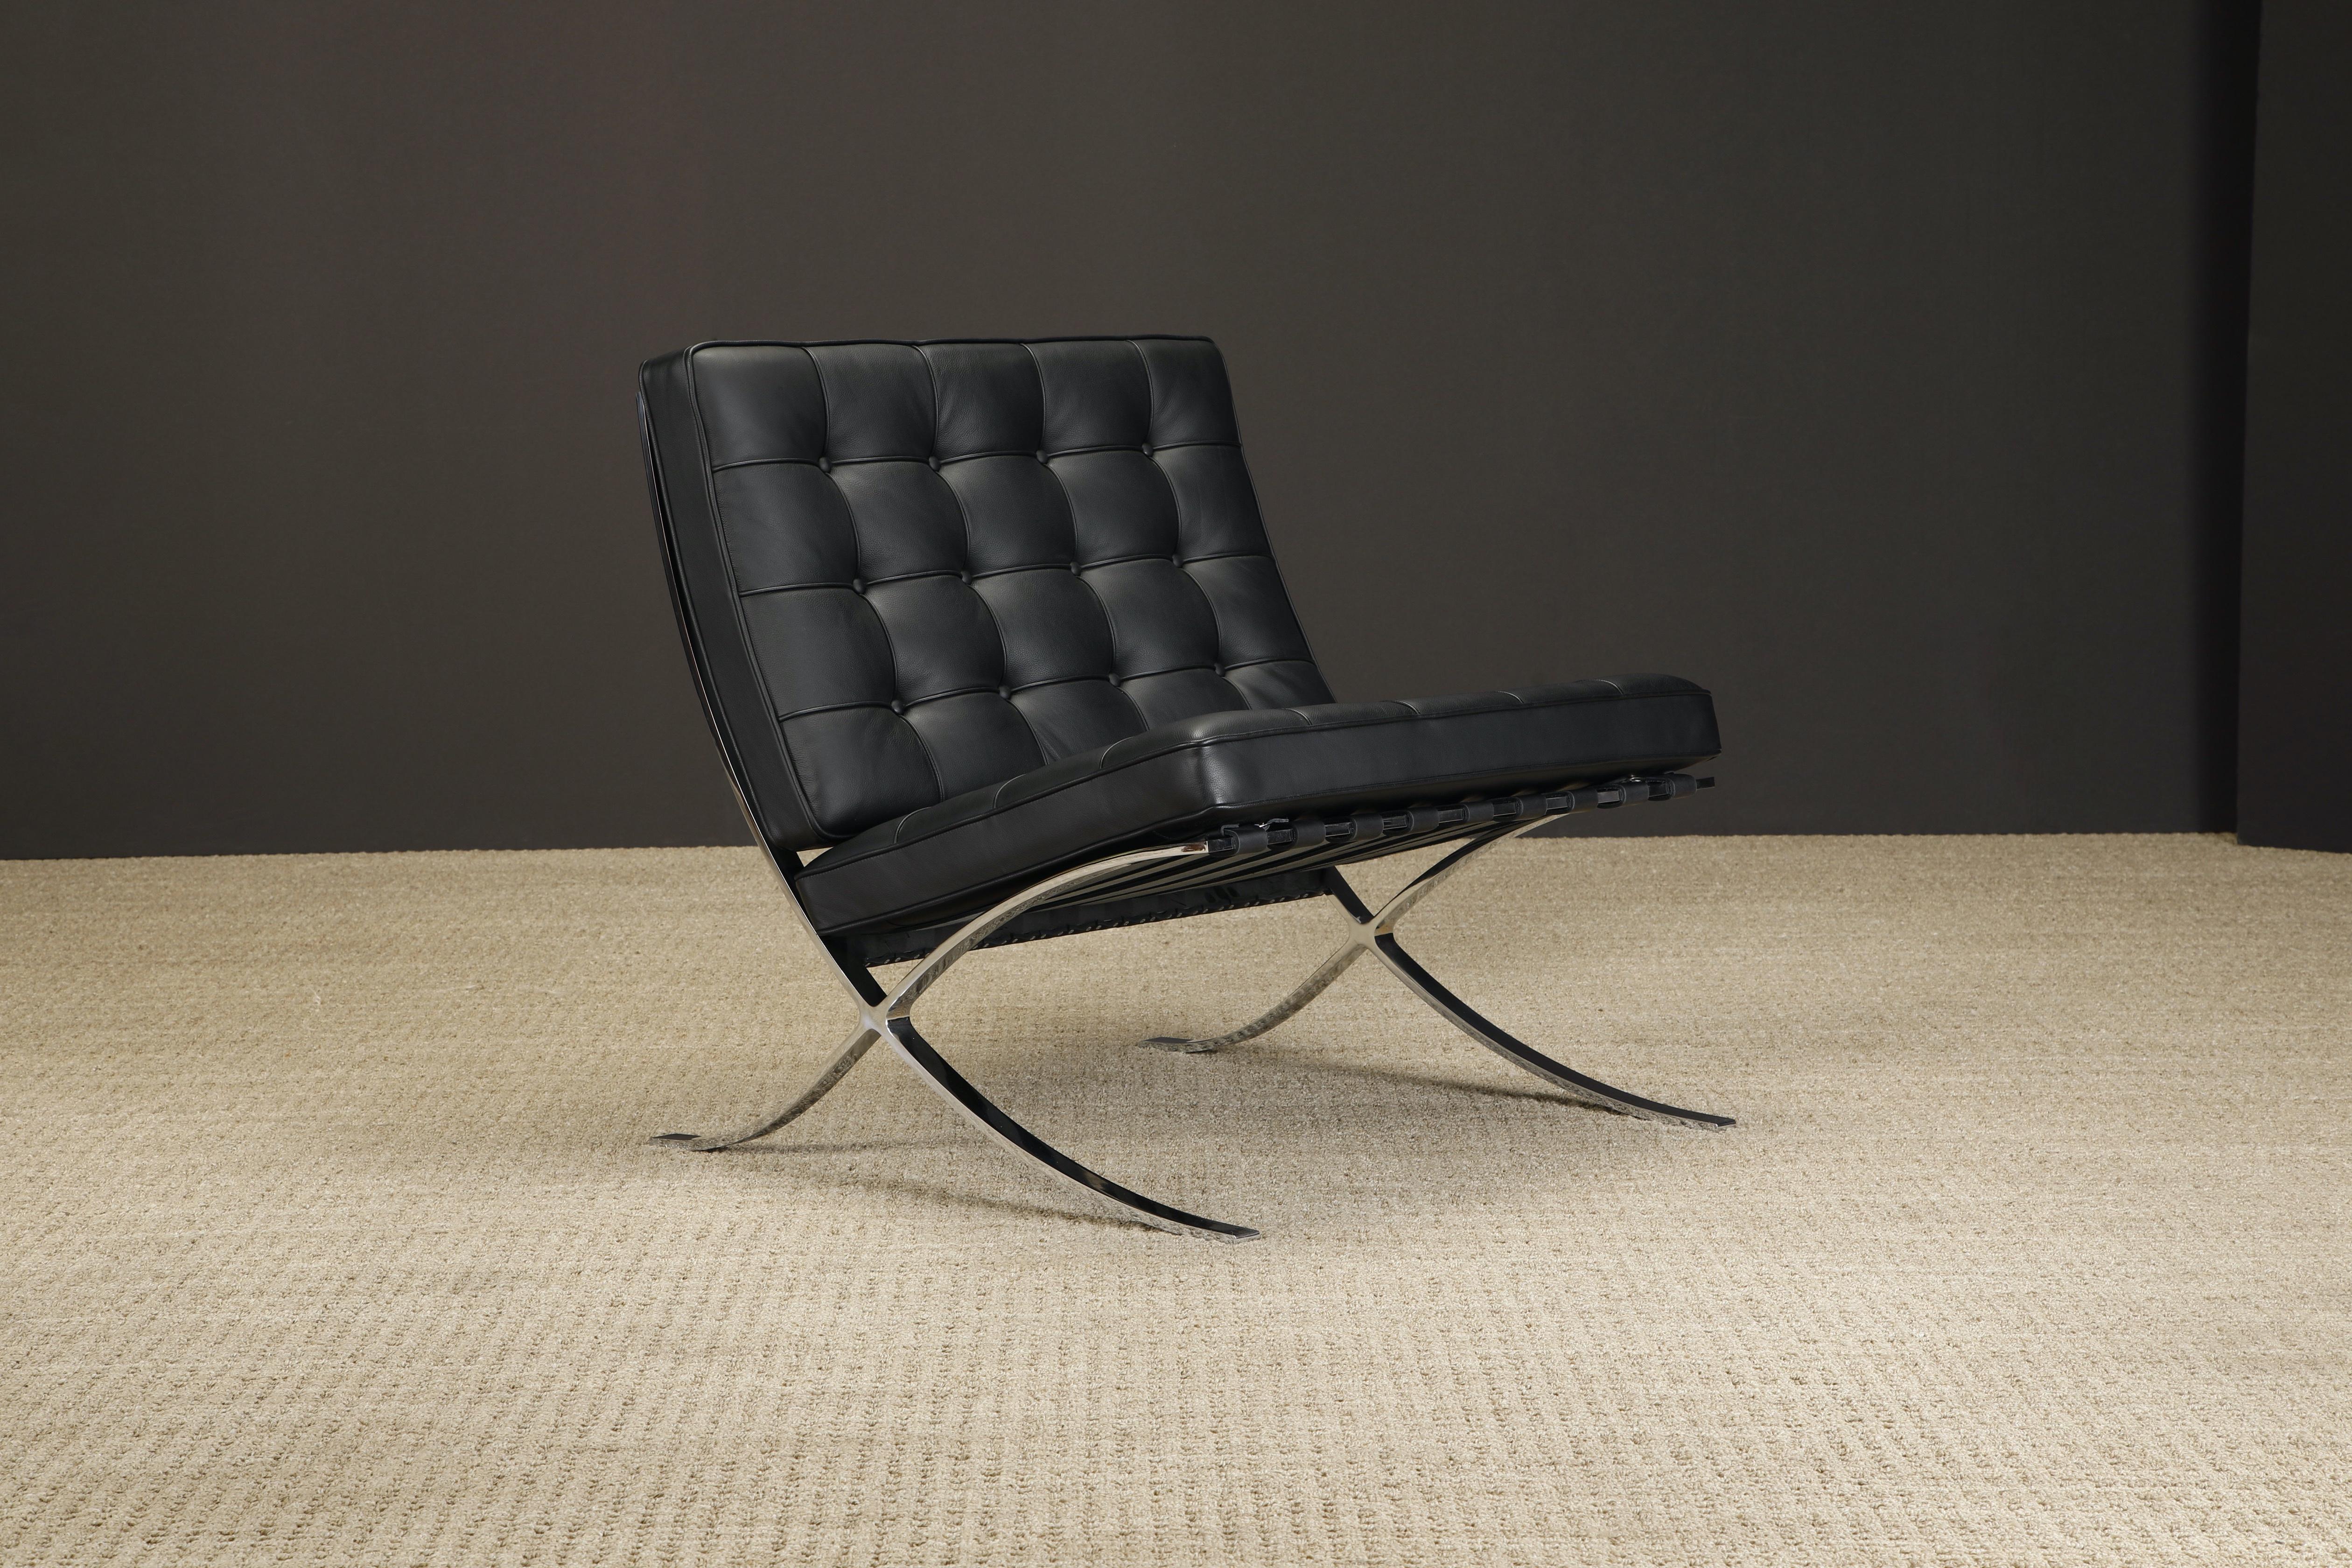 Stainless Steel Barcelona Lounge Chair & Ottoman by Mies van der Rohe for Knoll Studios, Signed